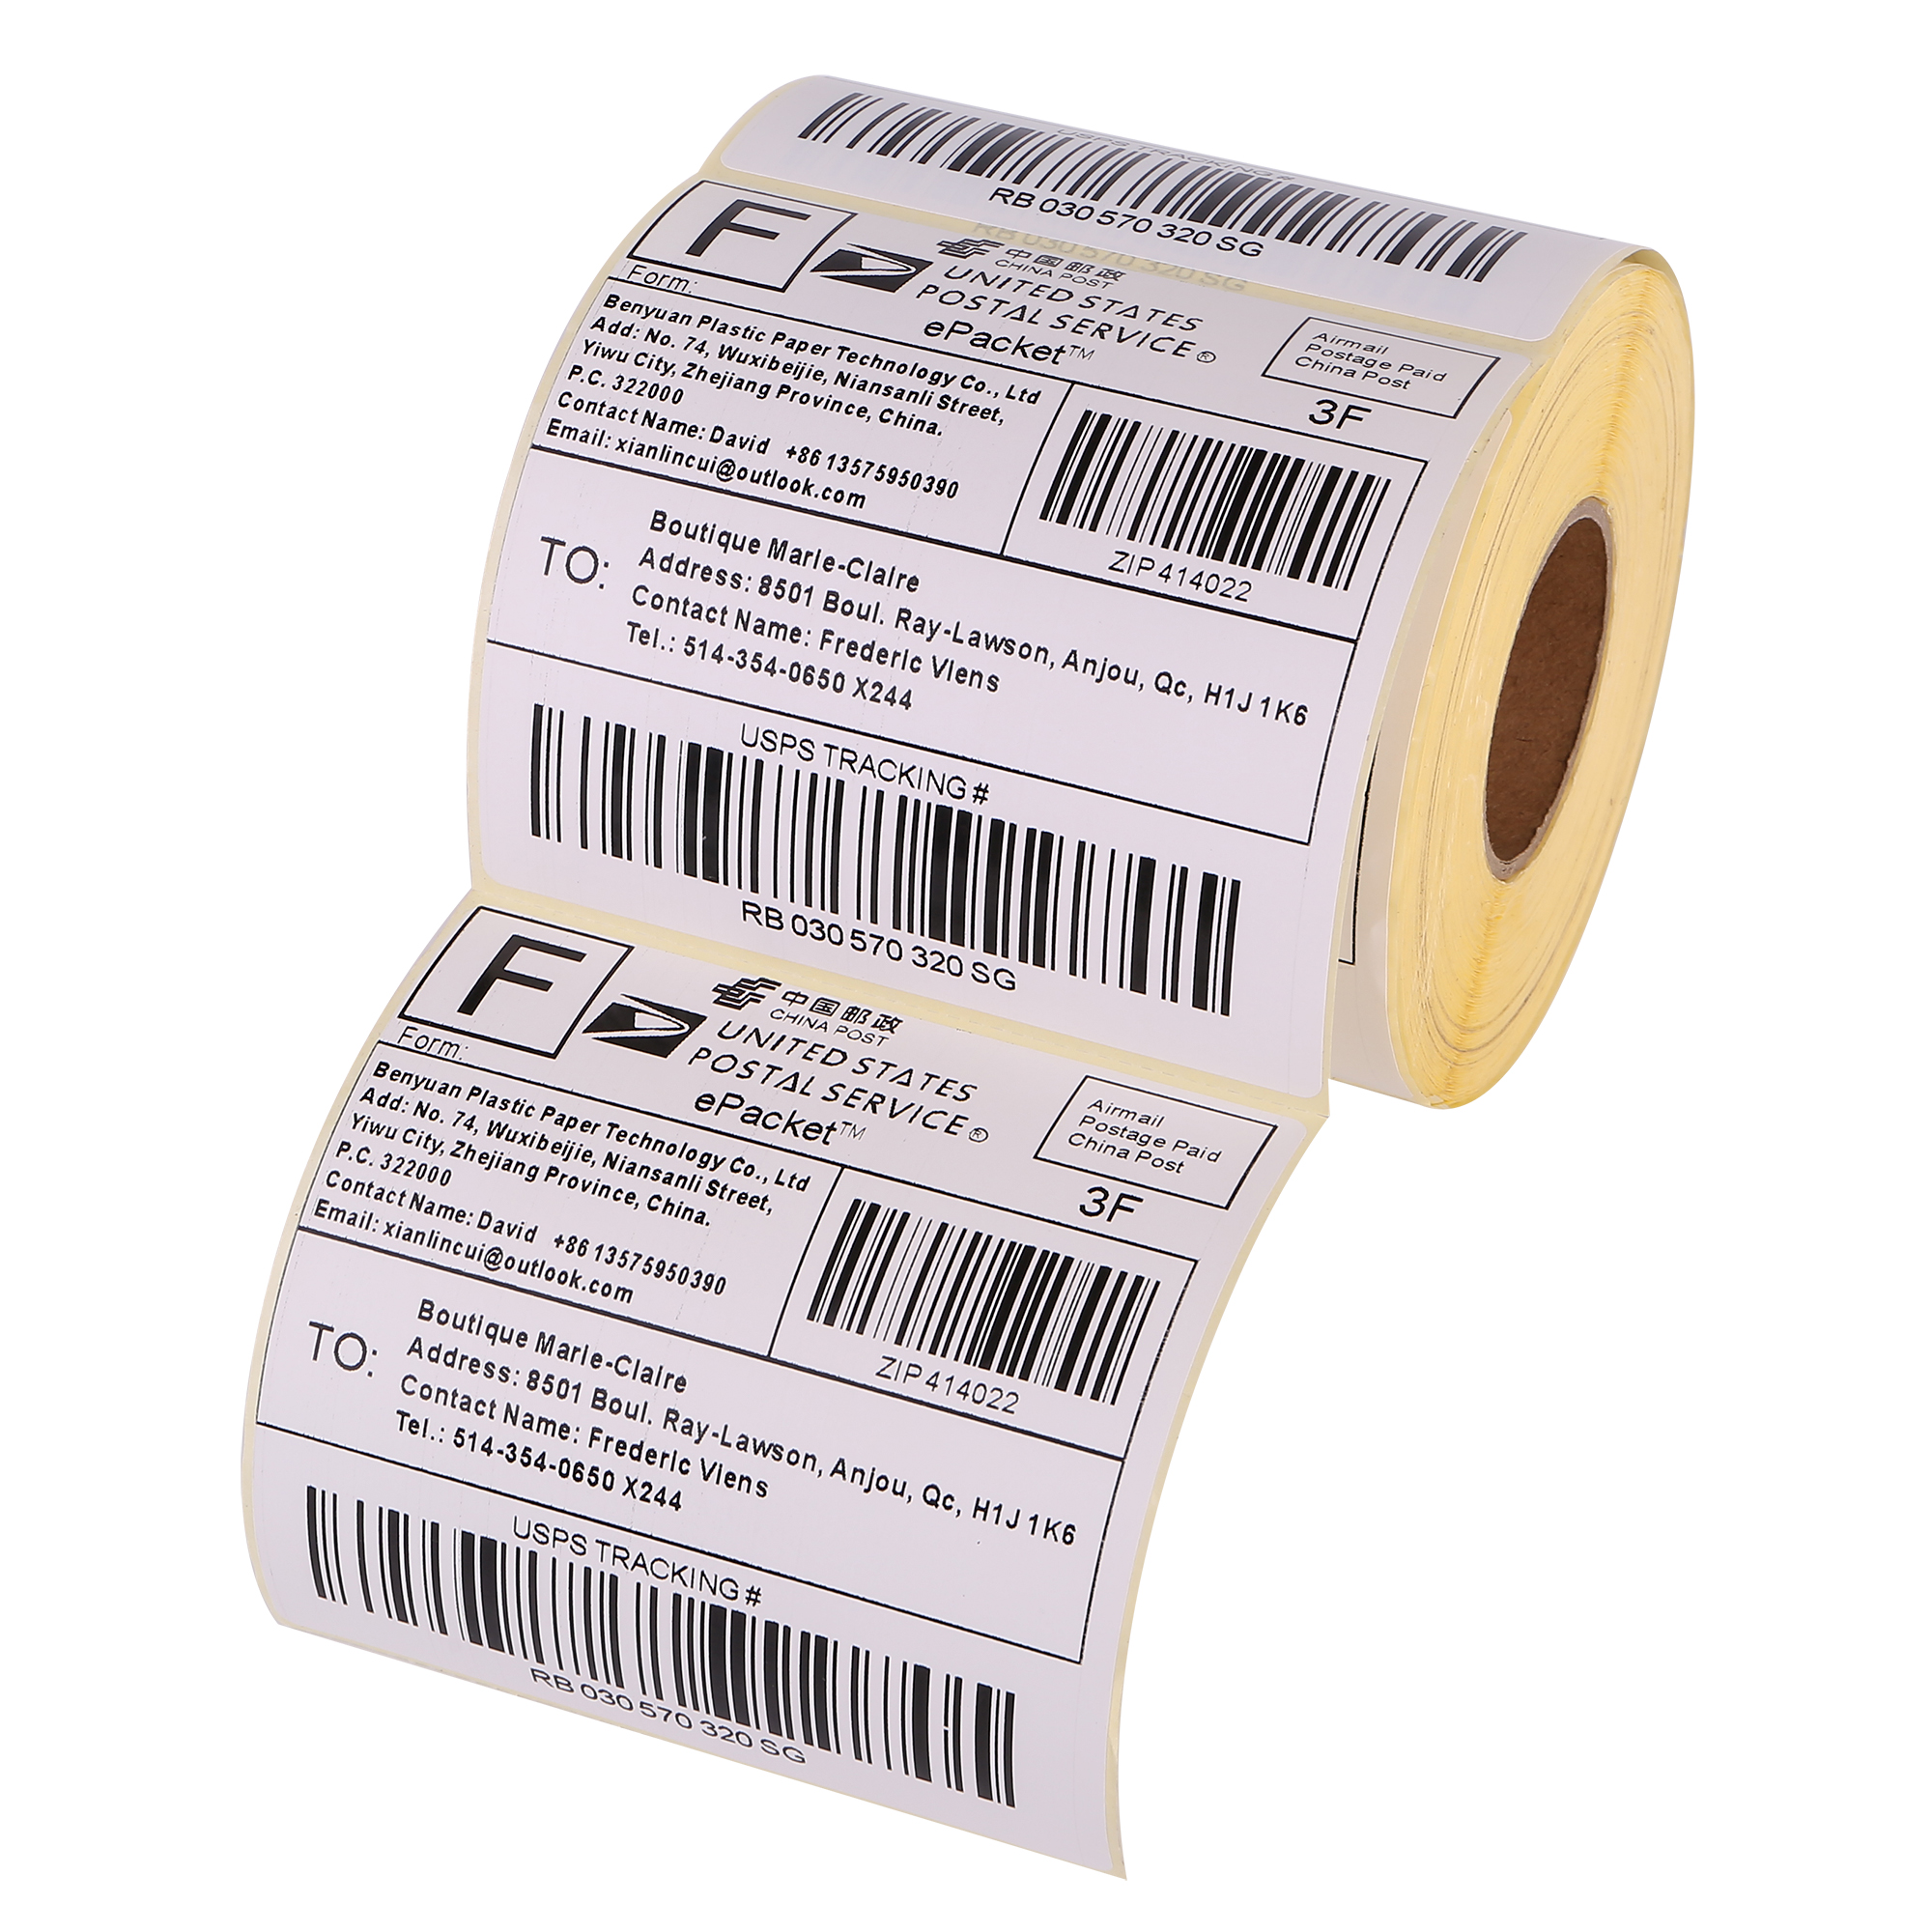 Hot sell 4″x6″ A6 Thermal Sticker Adhesive Blank Shipping Label